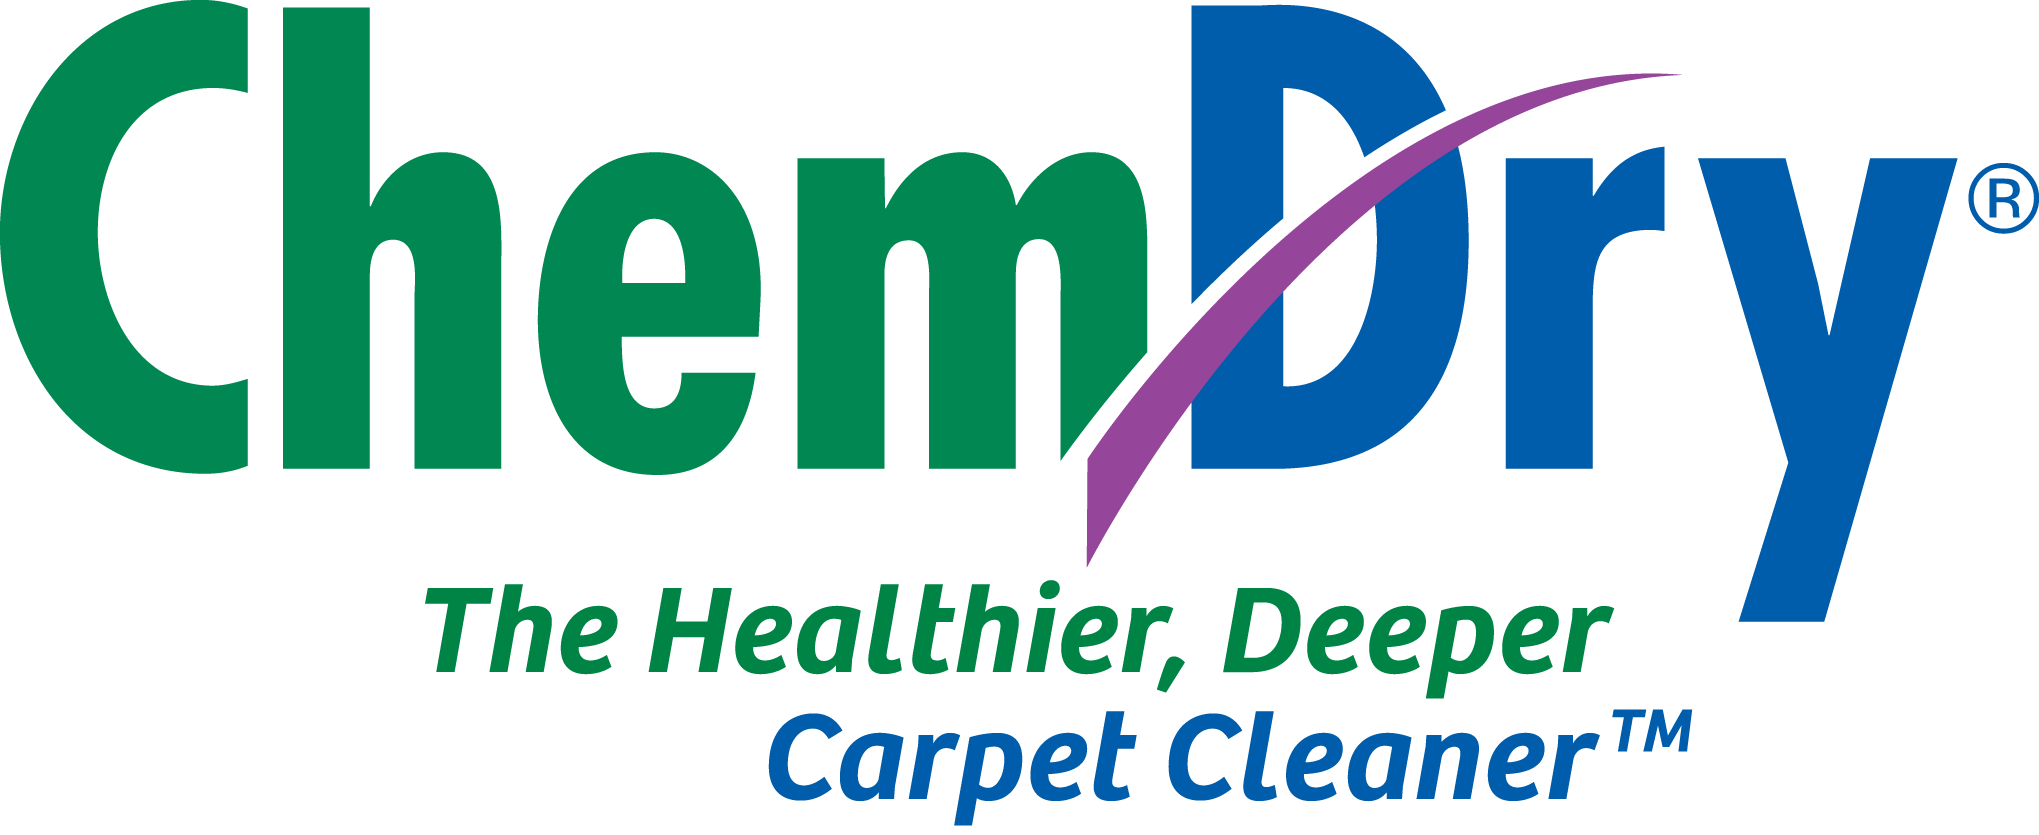 carpet cleaning kendallville in carpet cleaning services company by Noble Lagrange Chem-Dry